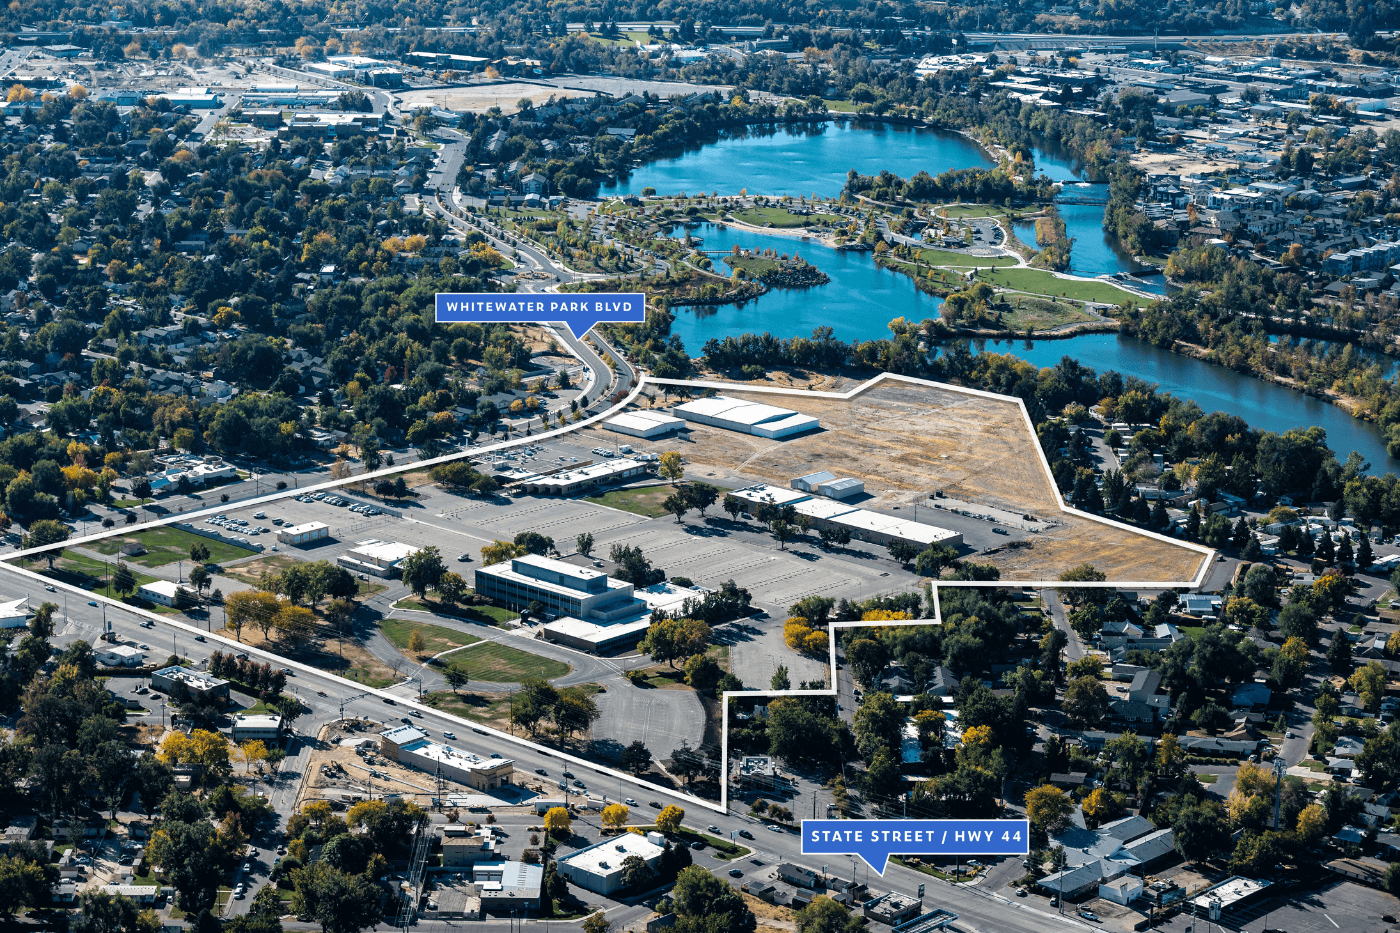 Whitewater Boise Aerial Image and Outline